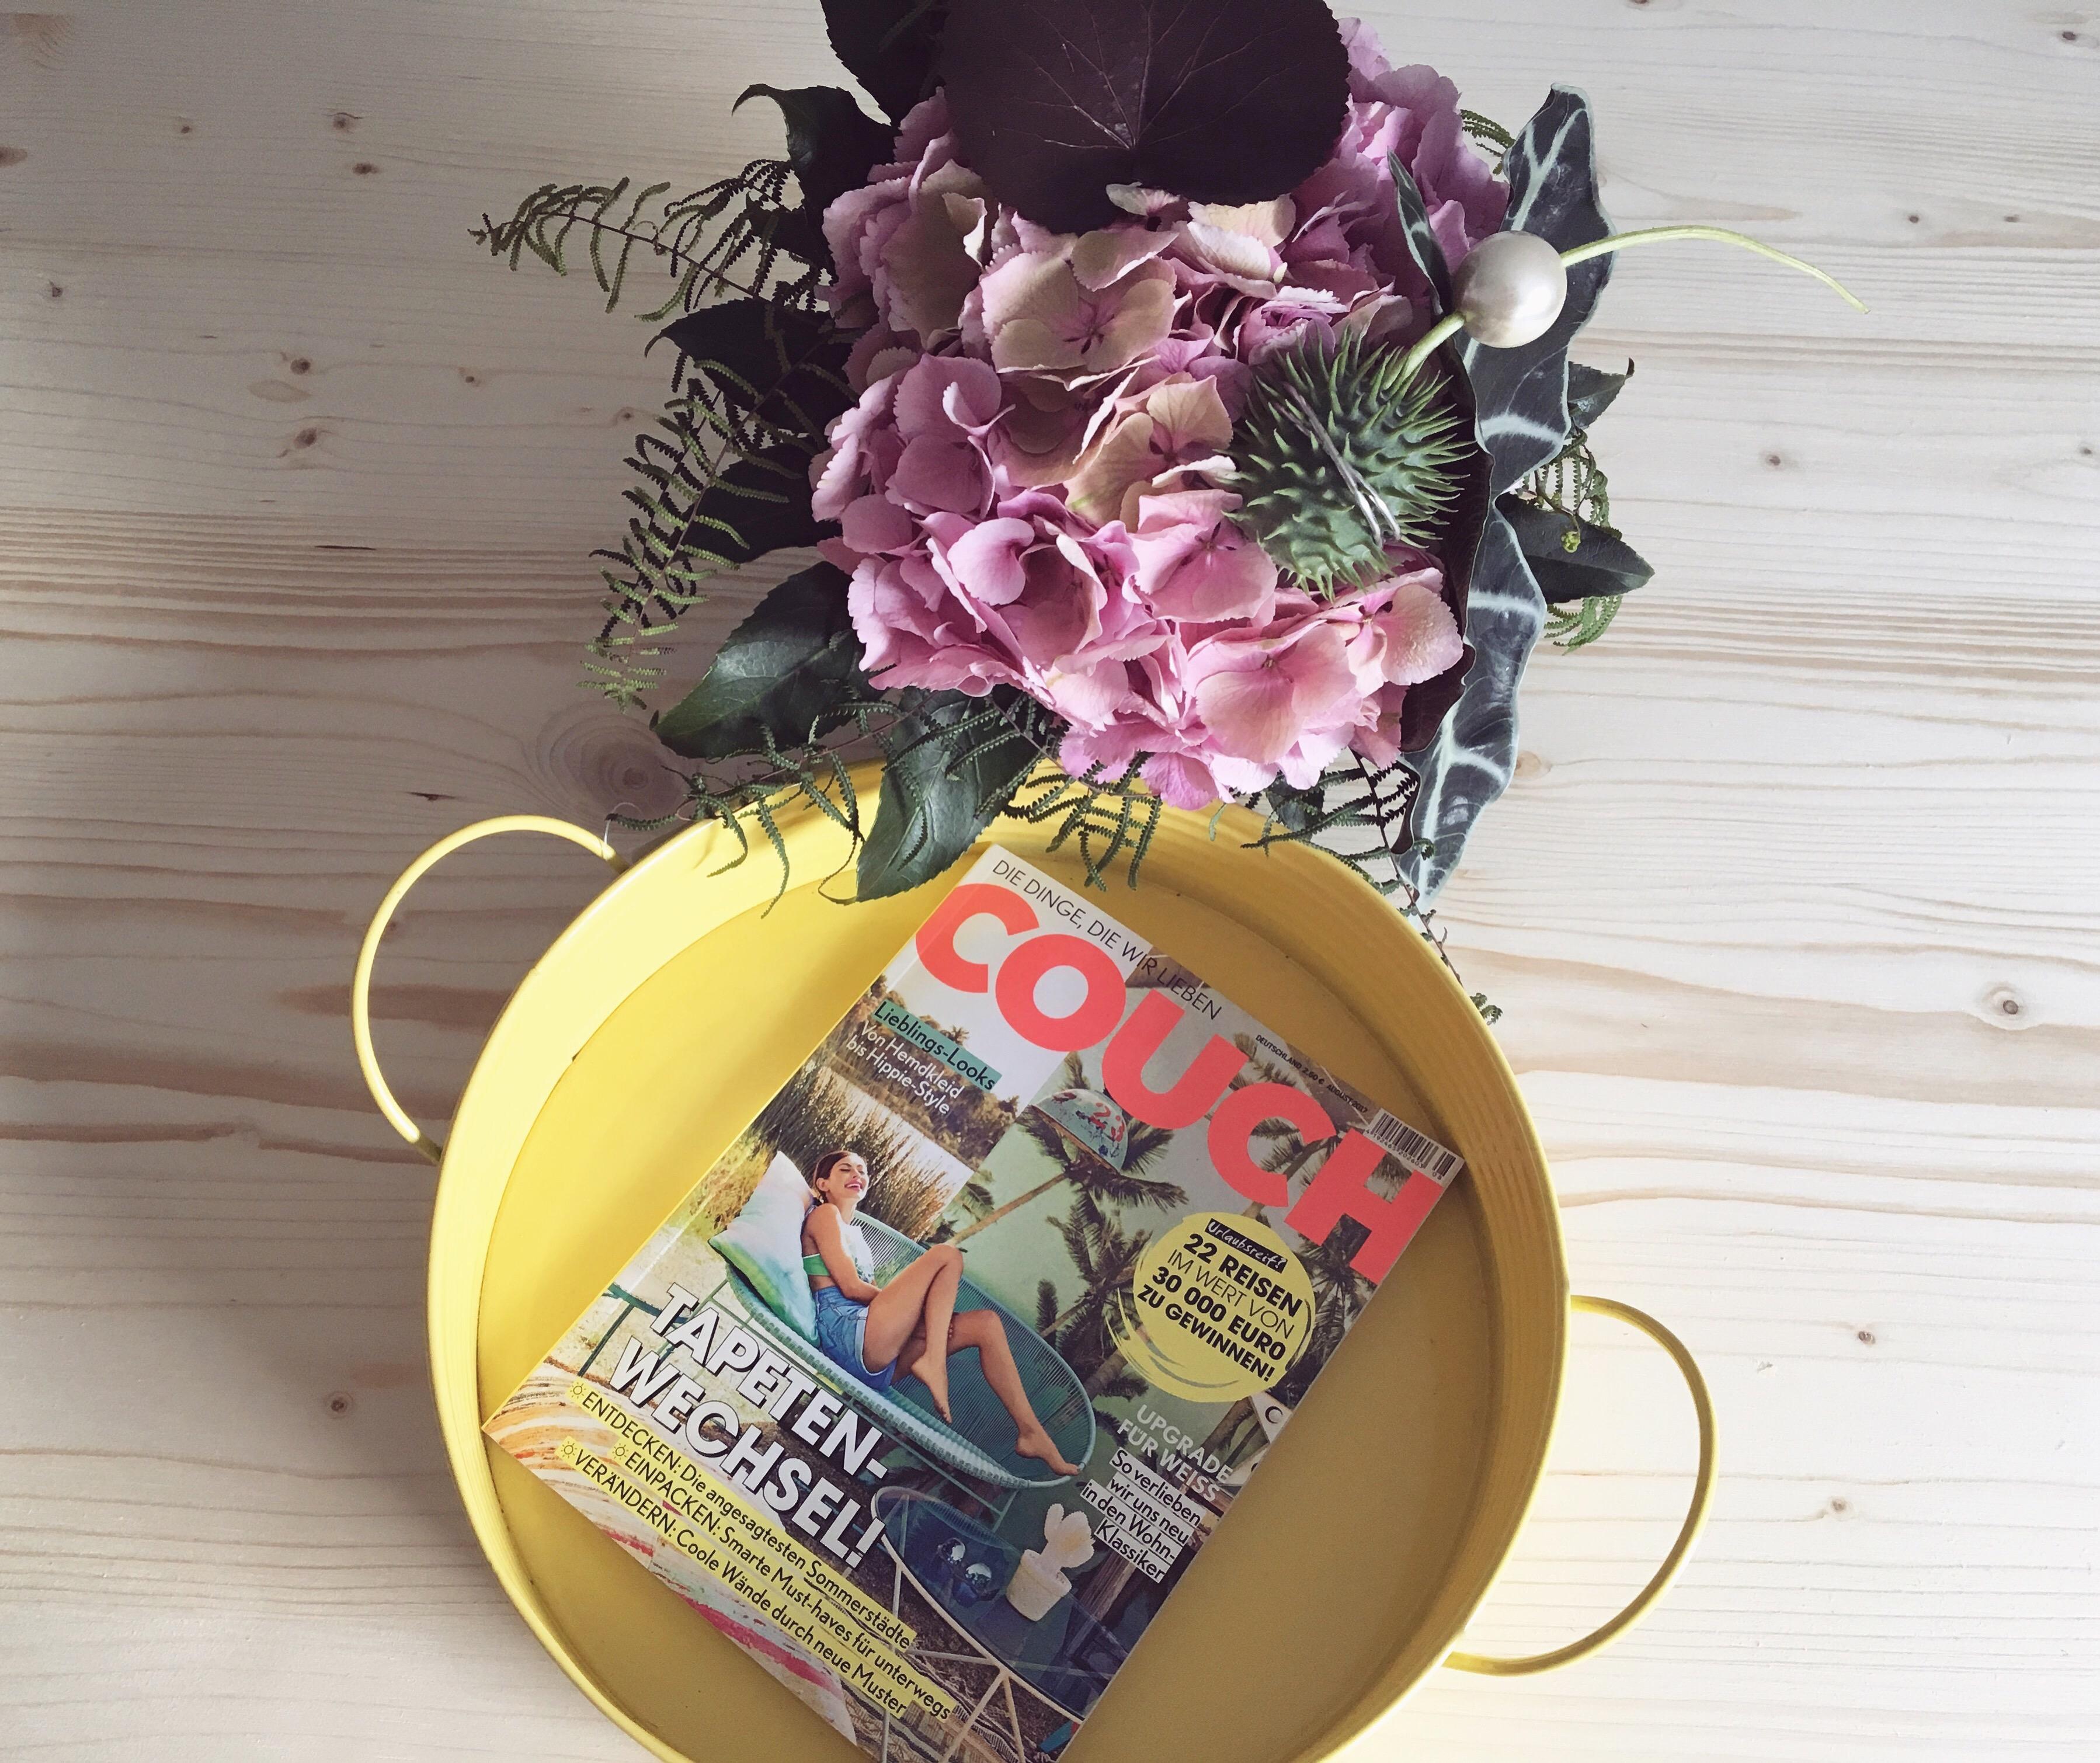 Couch Liebe 🌸
#lieblingsmagazin#flowers#homelove